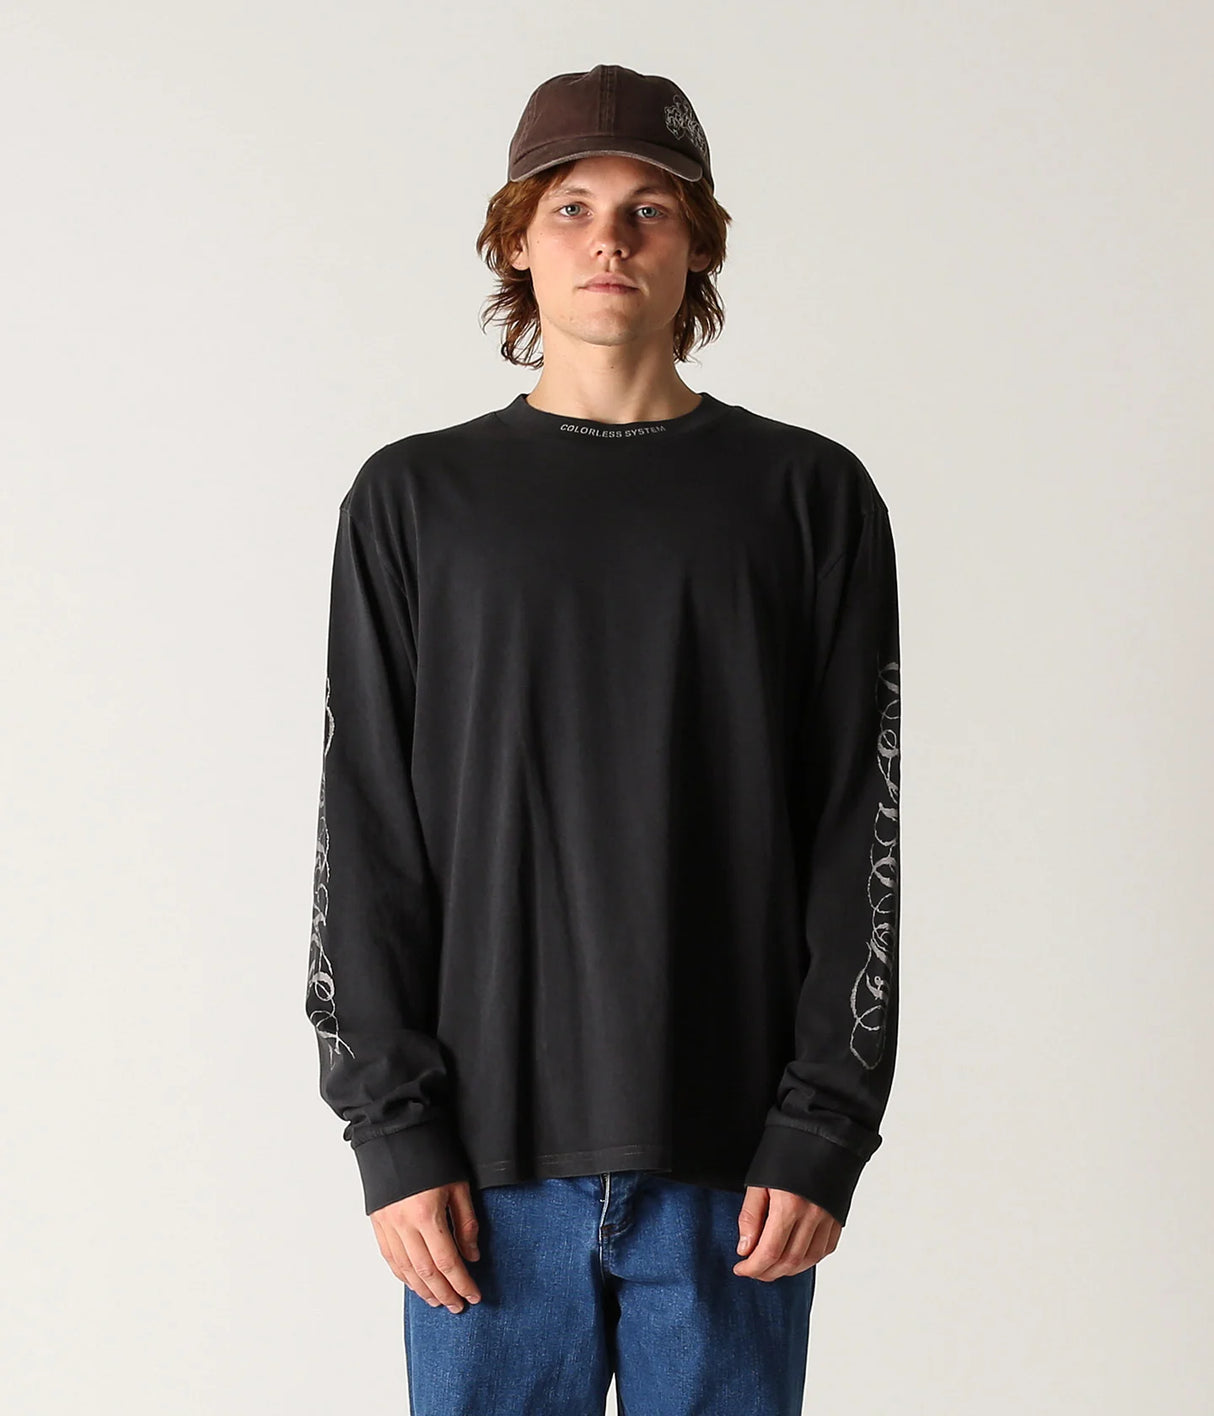 Former Wire L/S T-Shirt